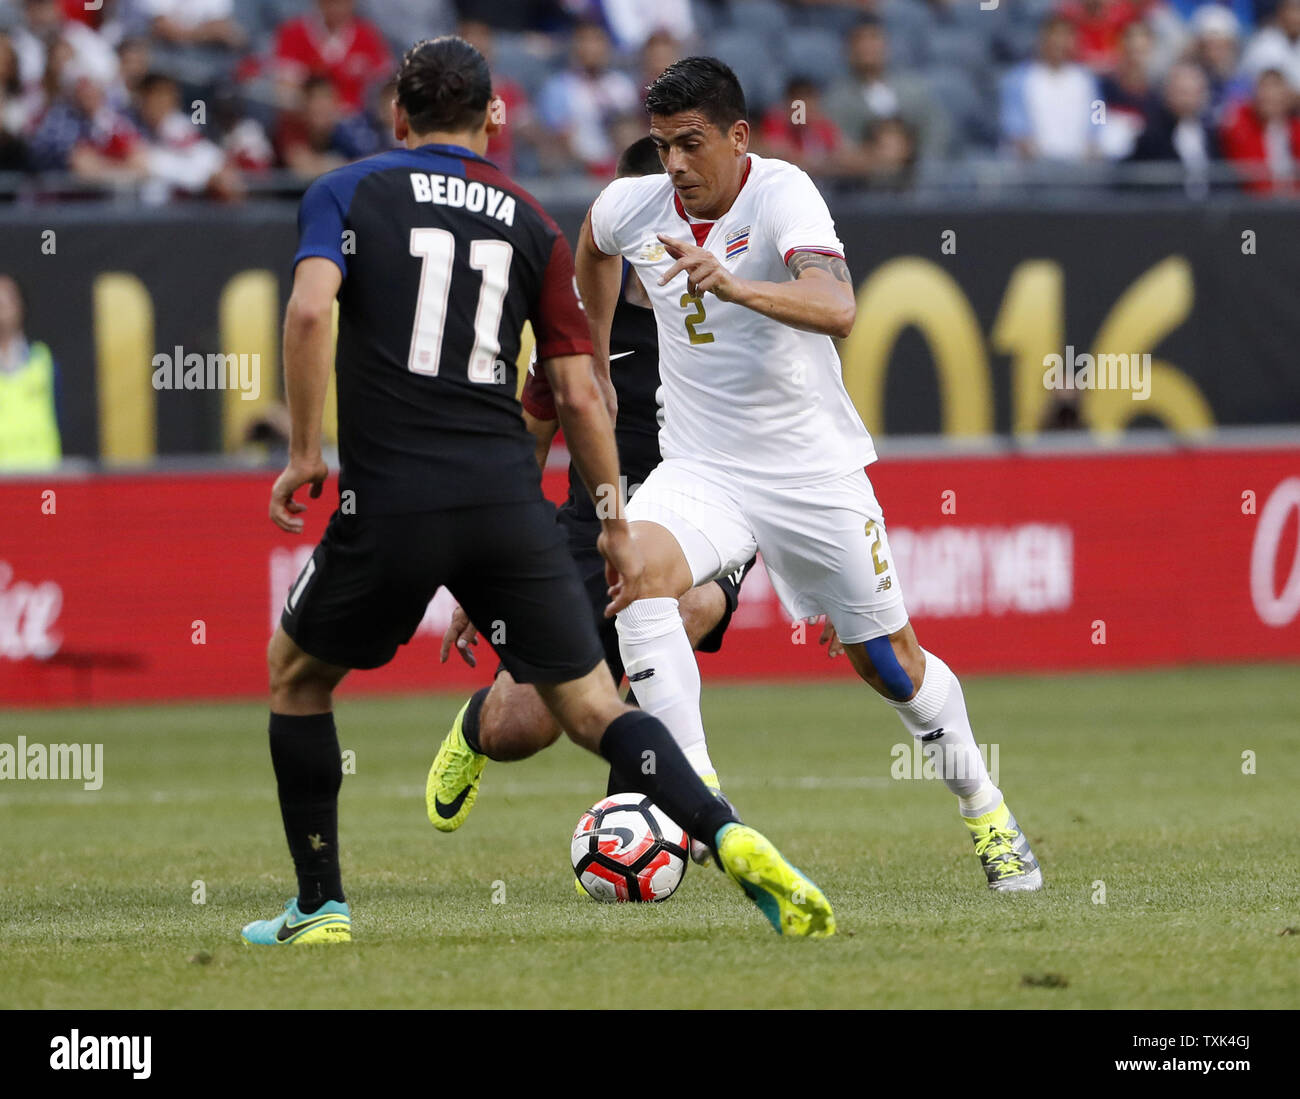 Costa Rica defender Johnny Acosta (R) moves the ball as United States midfielder Alejandro Bedoya defends during the first half of a 2016 Copa America Centenario Group A match at Soldier Field in Chicago on June 7, 2016. The United States defeated Costa Rica 4-0.     Photo by Brian Kersey/UPI Stock Photo